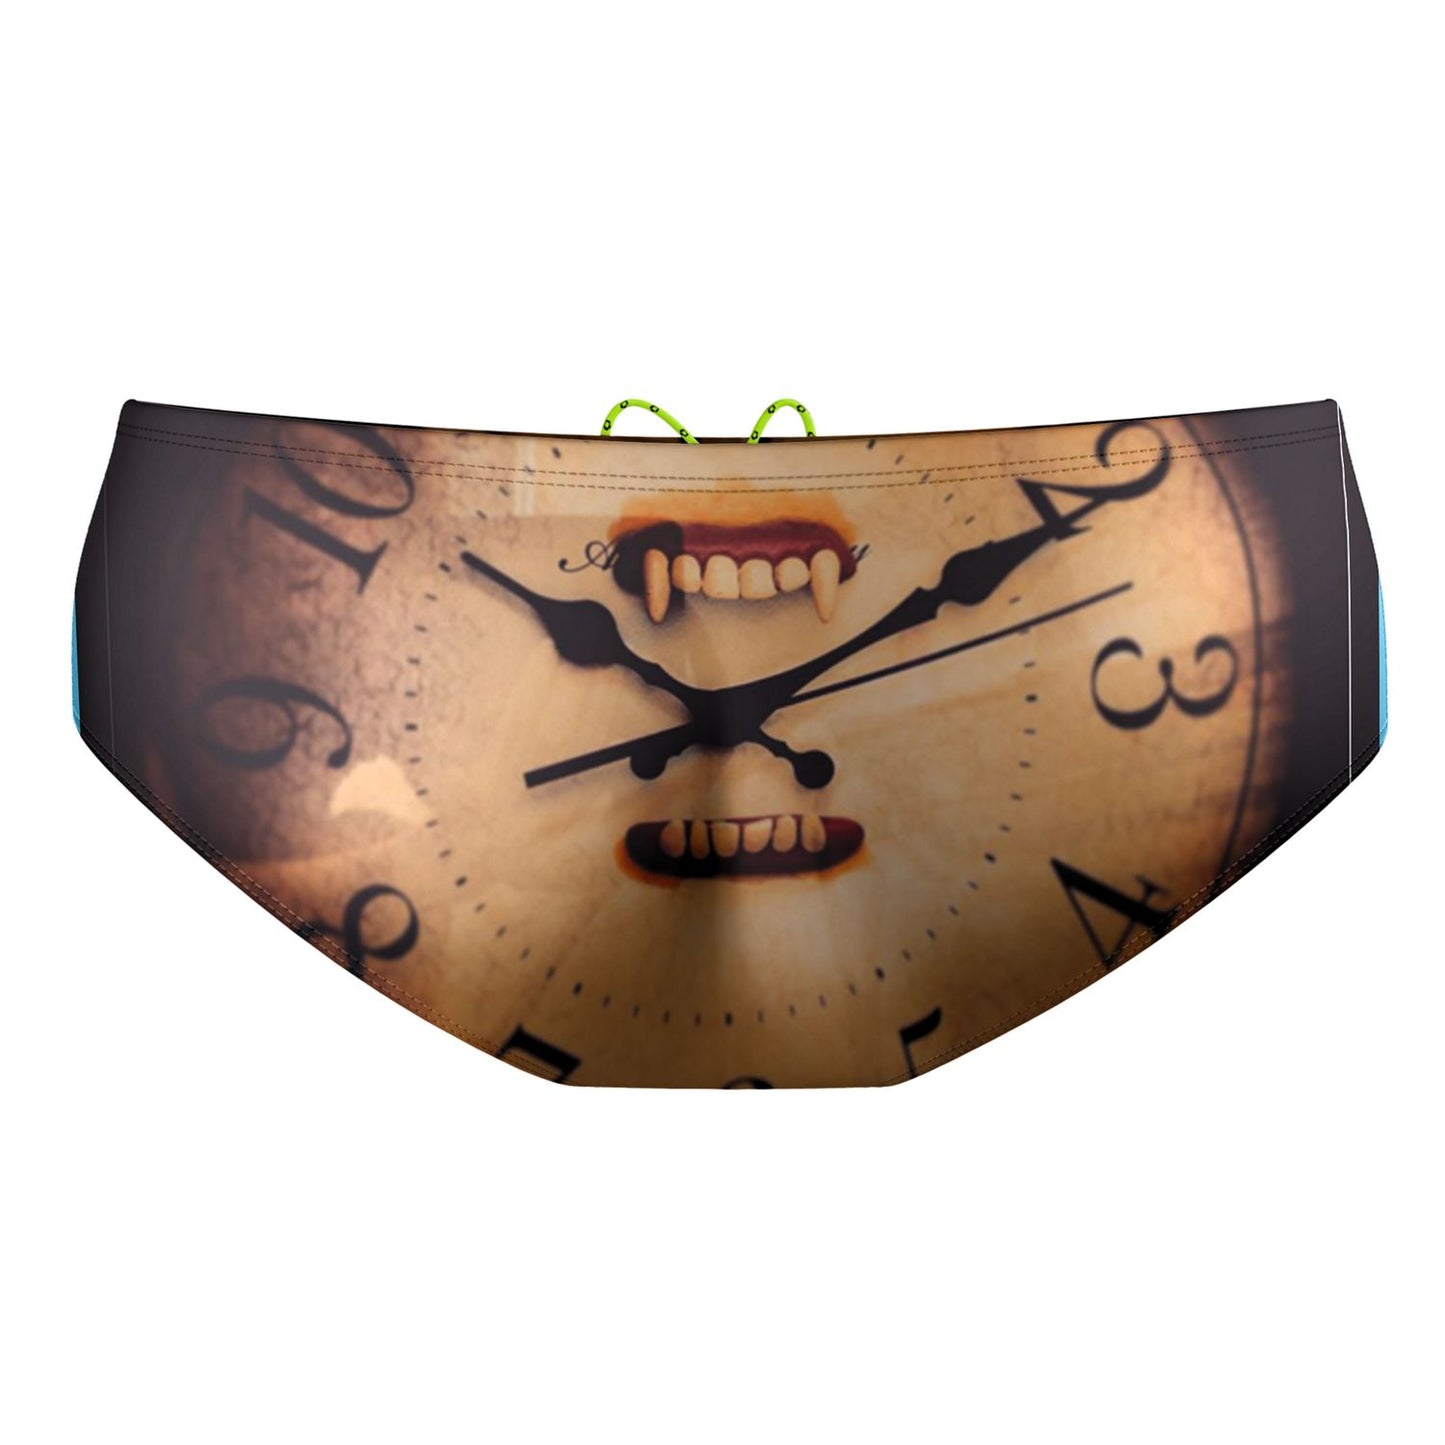 Time Eater Classic Brief